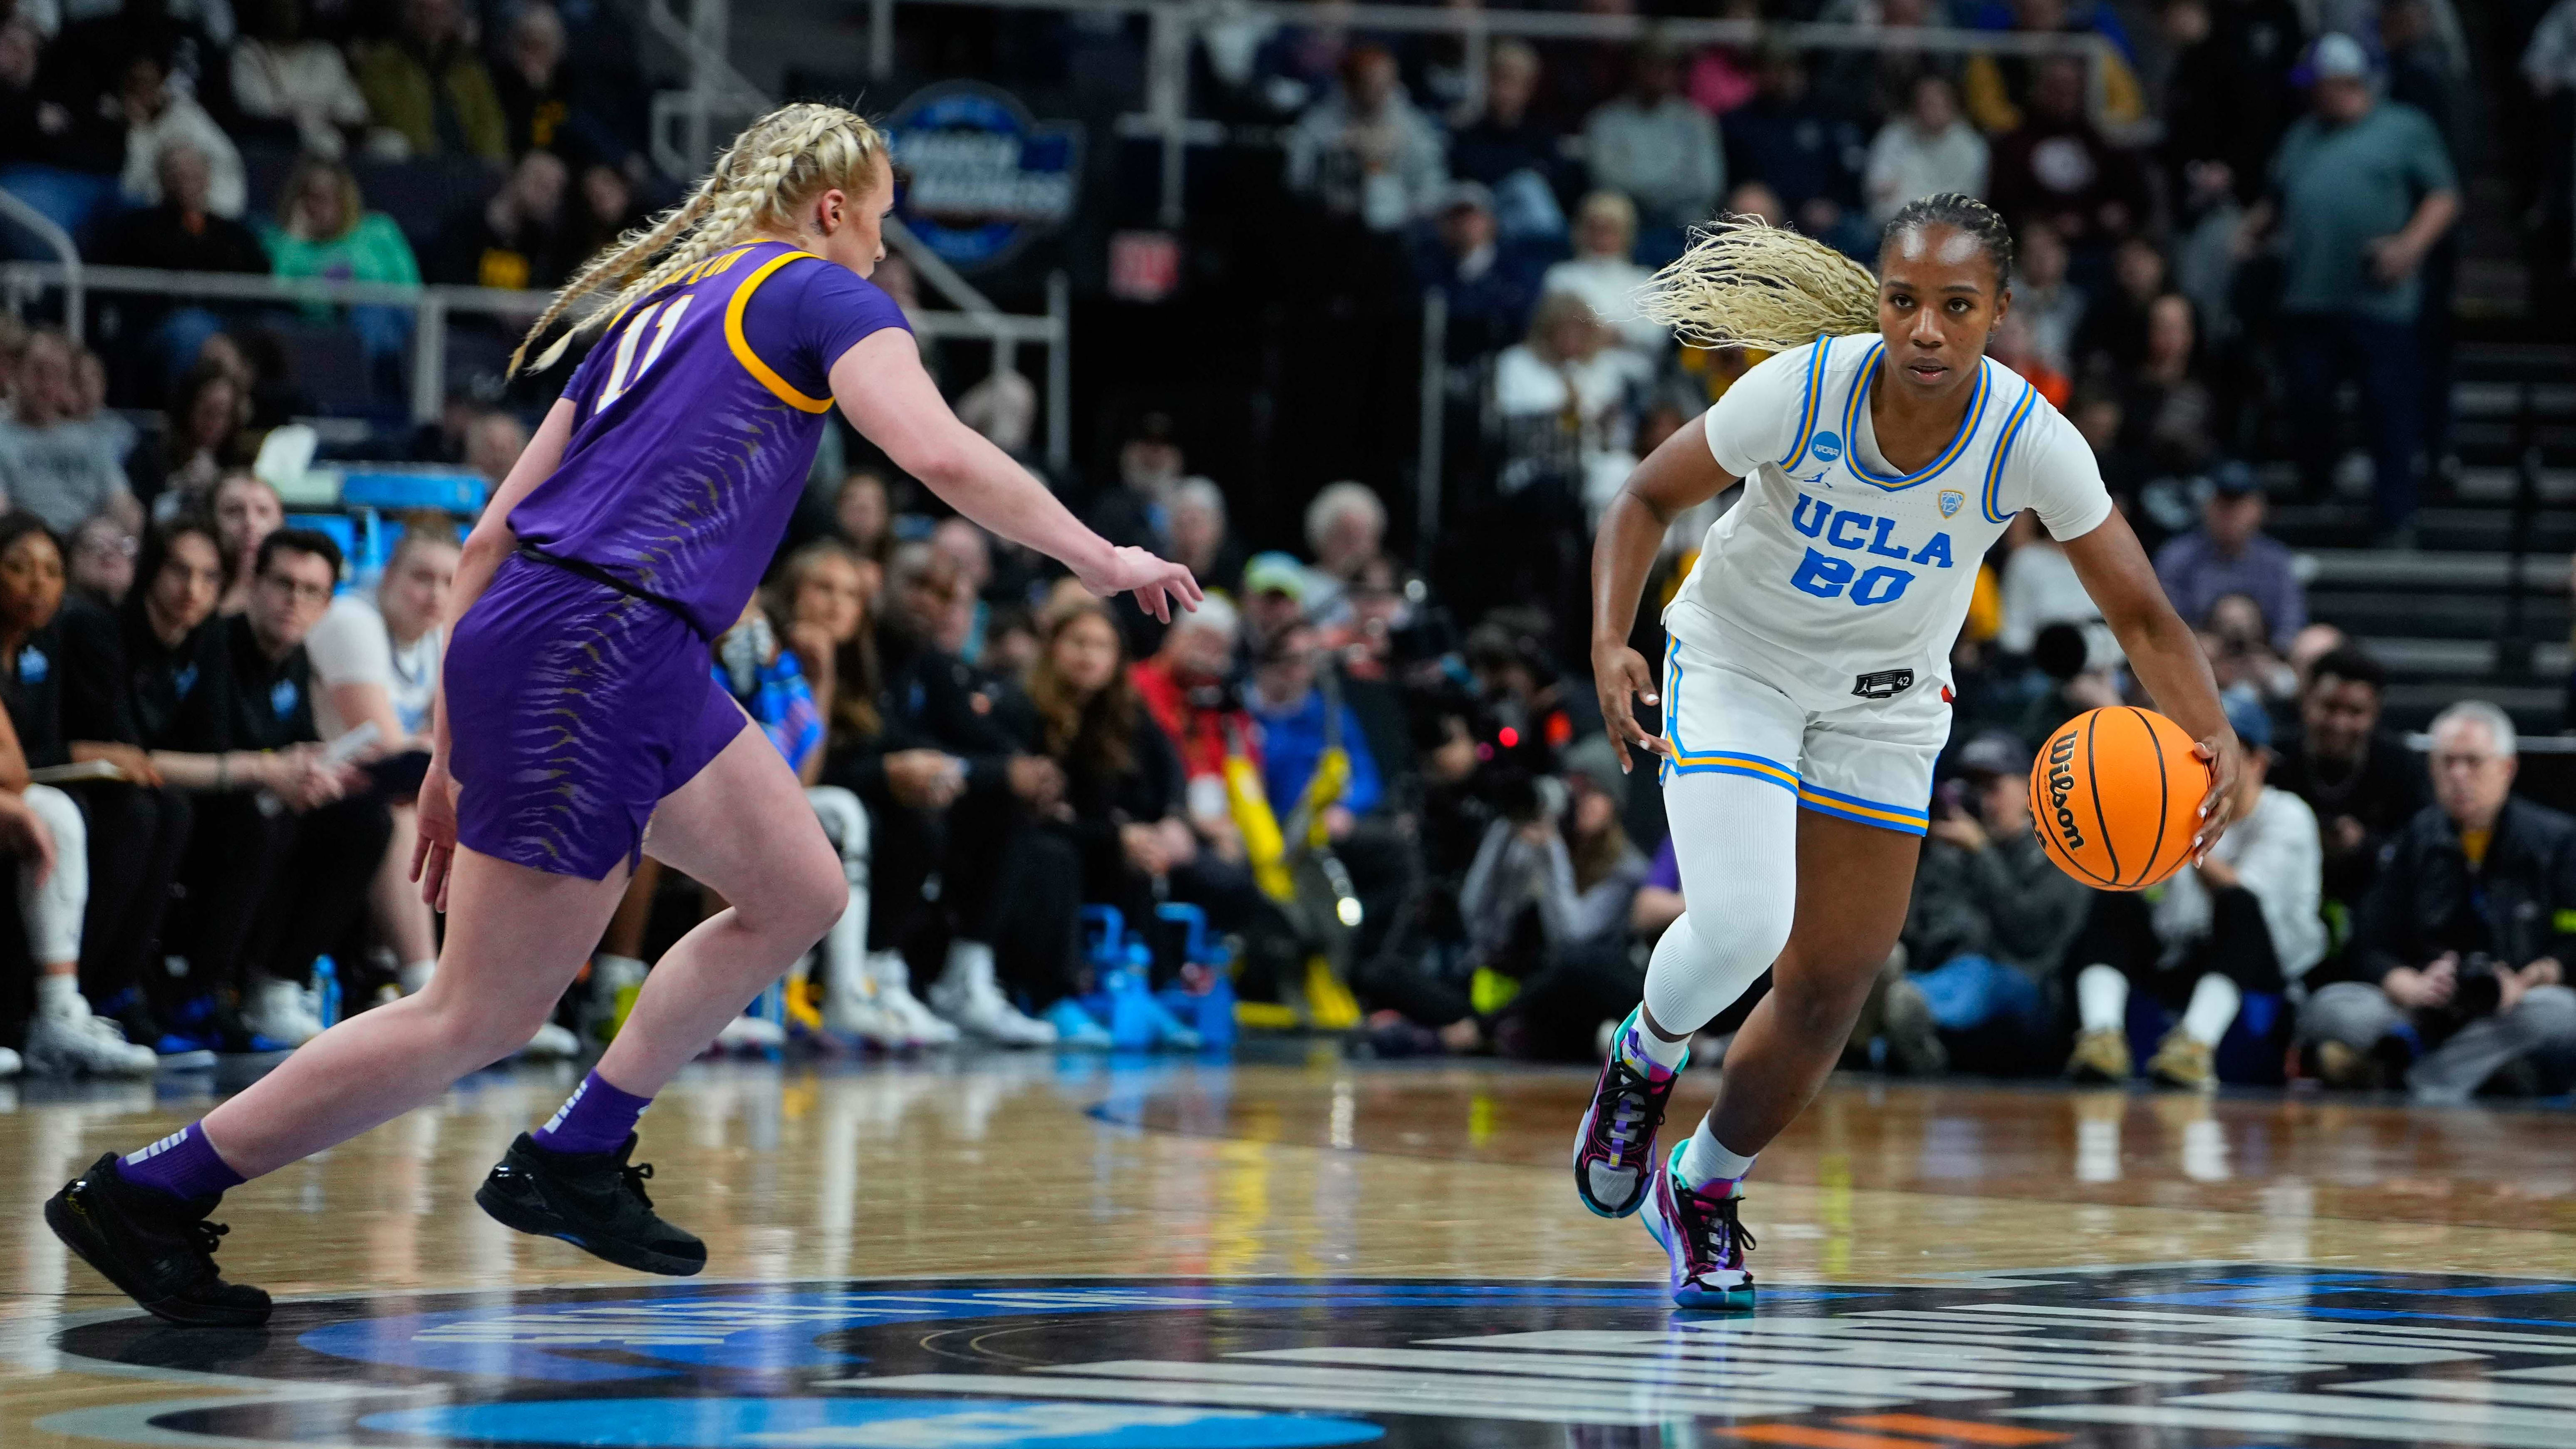 UCLA Women’s Basketball: How To Watch Likely First Round Pick Charisma Osborne’s Draft Fate